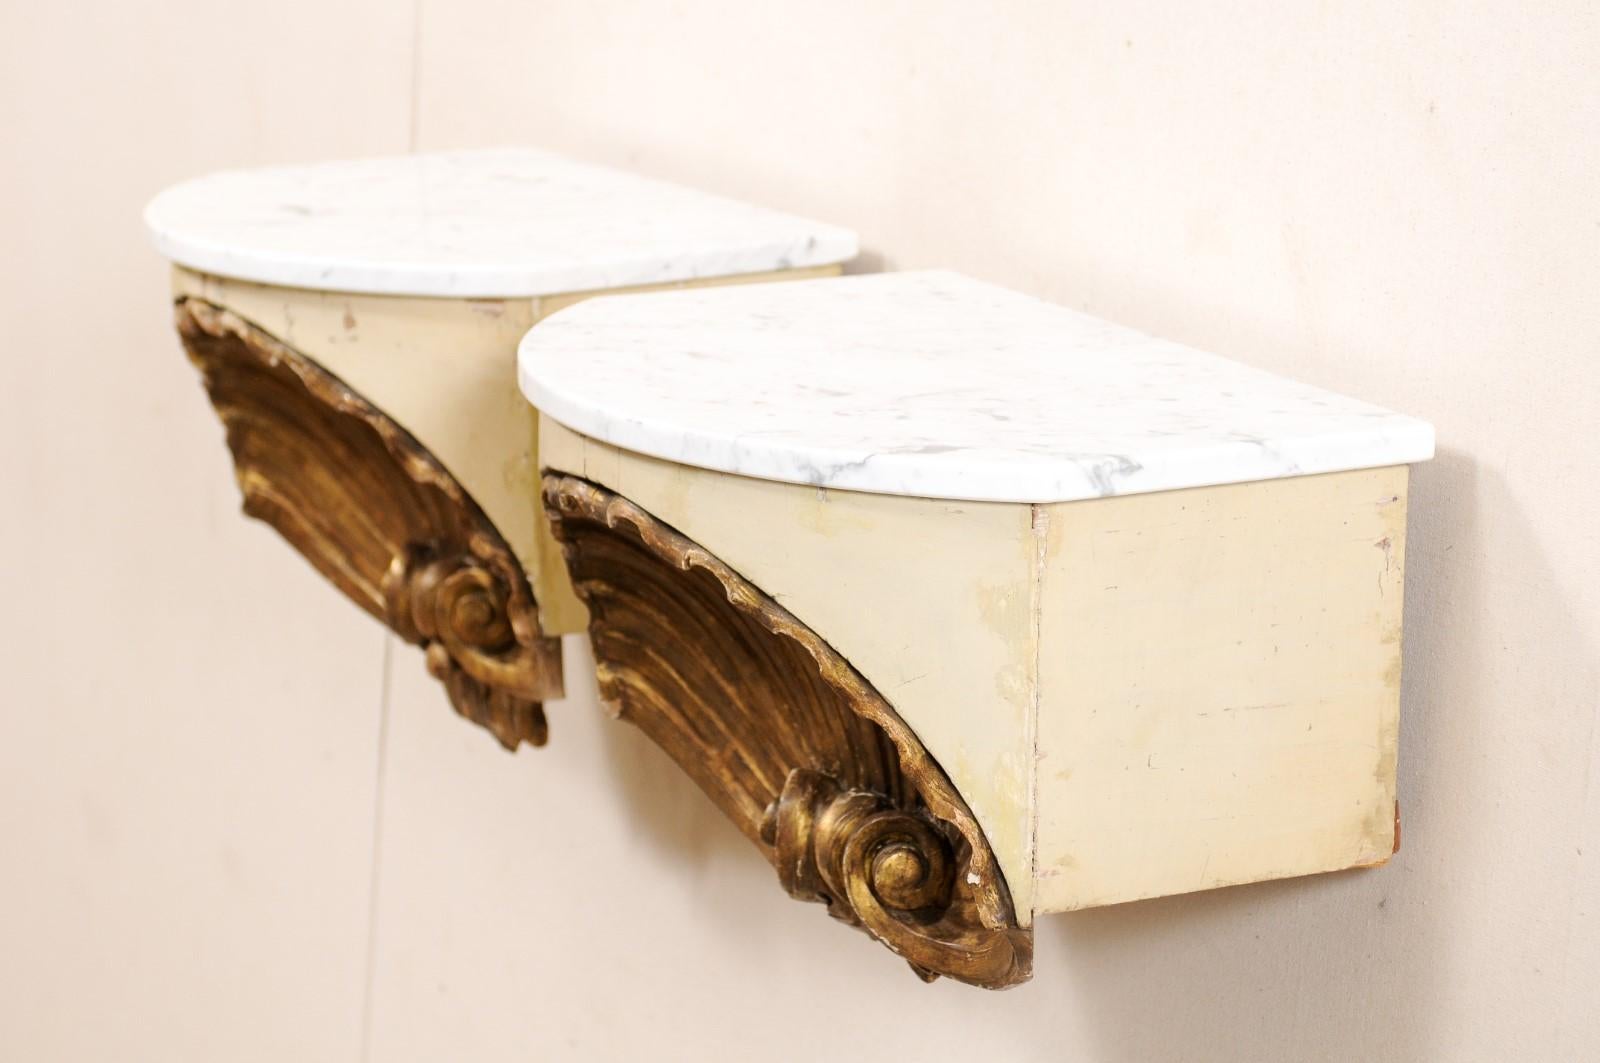 Pair of Early 19th Century Italian Shell Wall-Shelves with Marble Tops For Sale 7